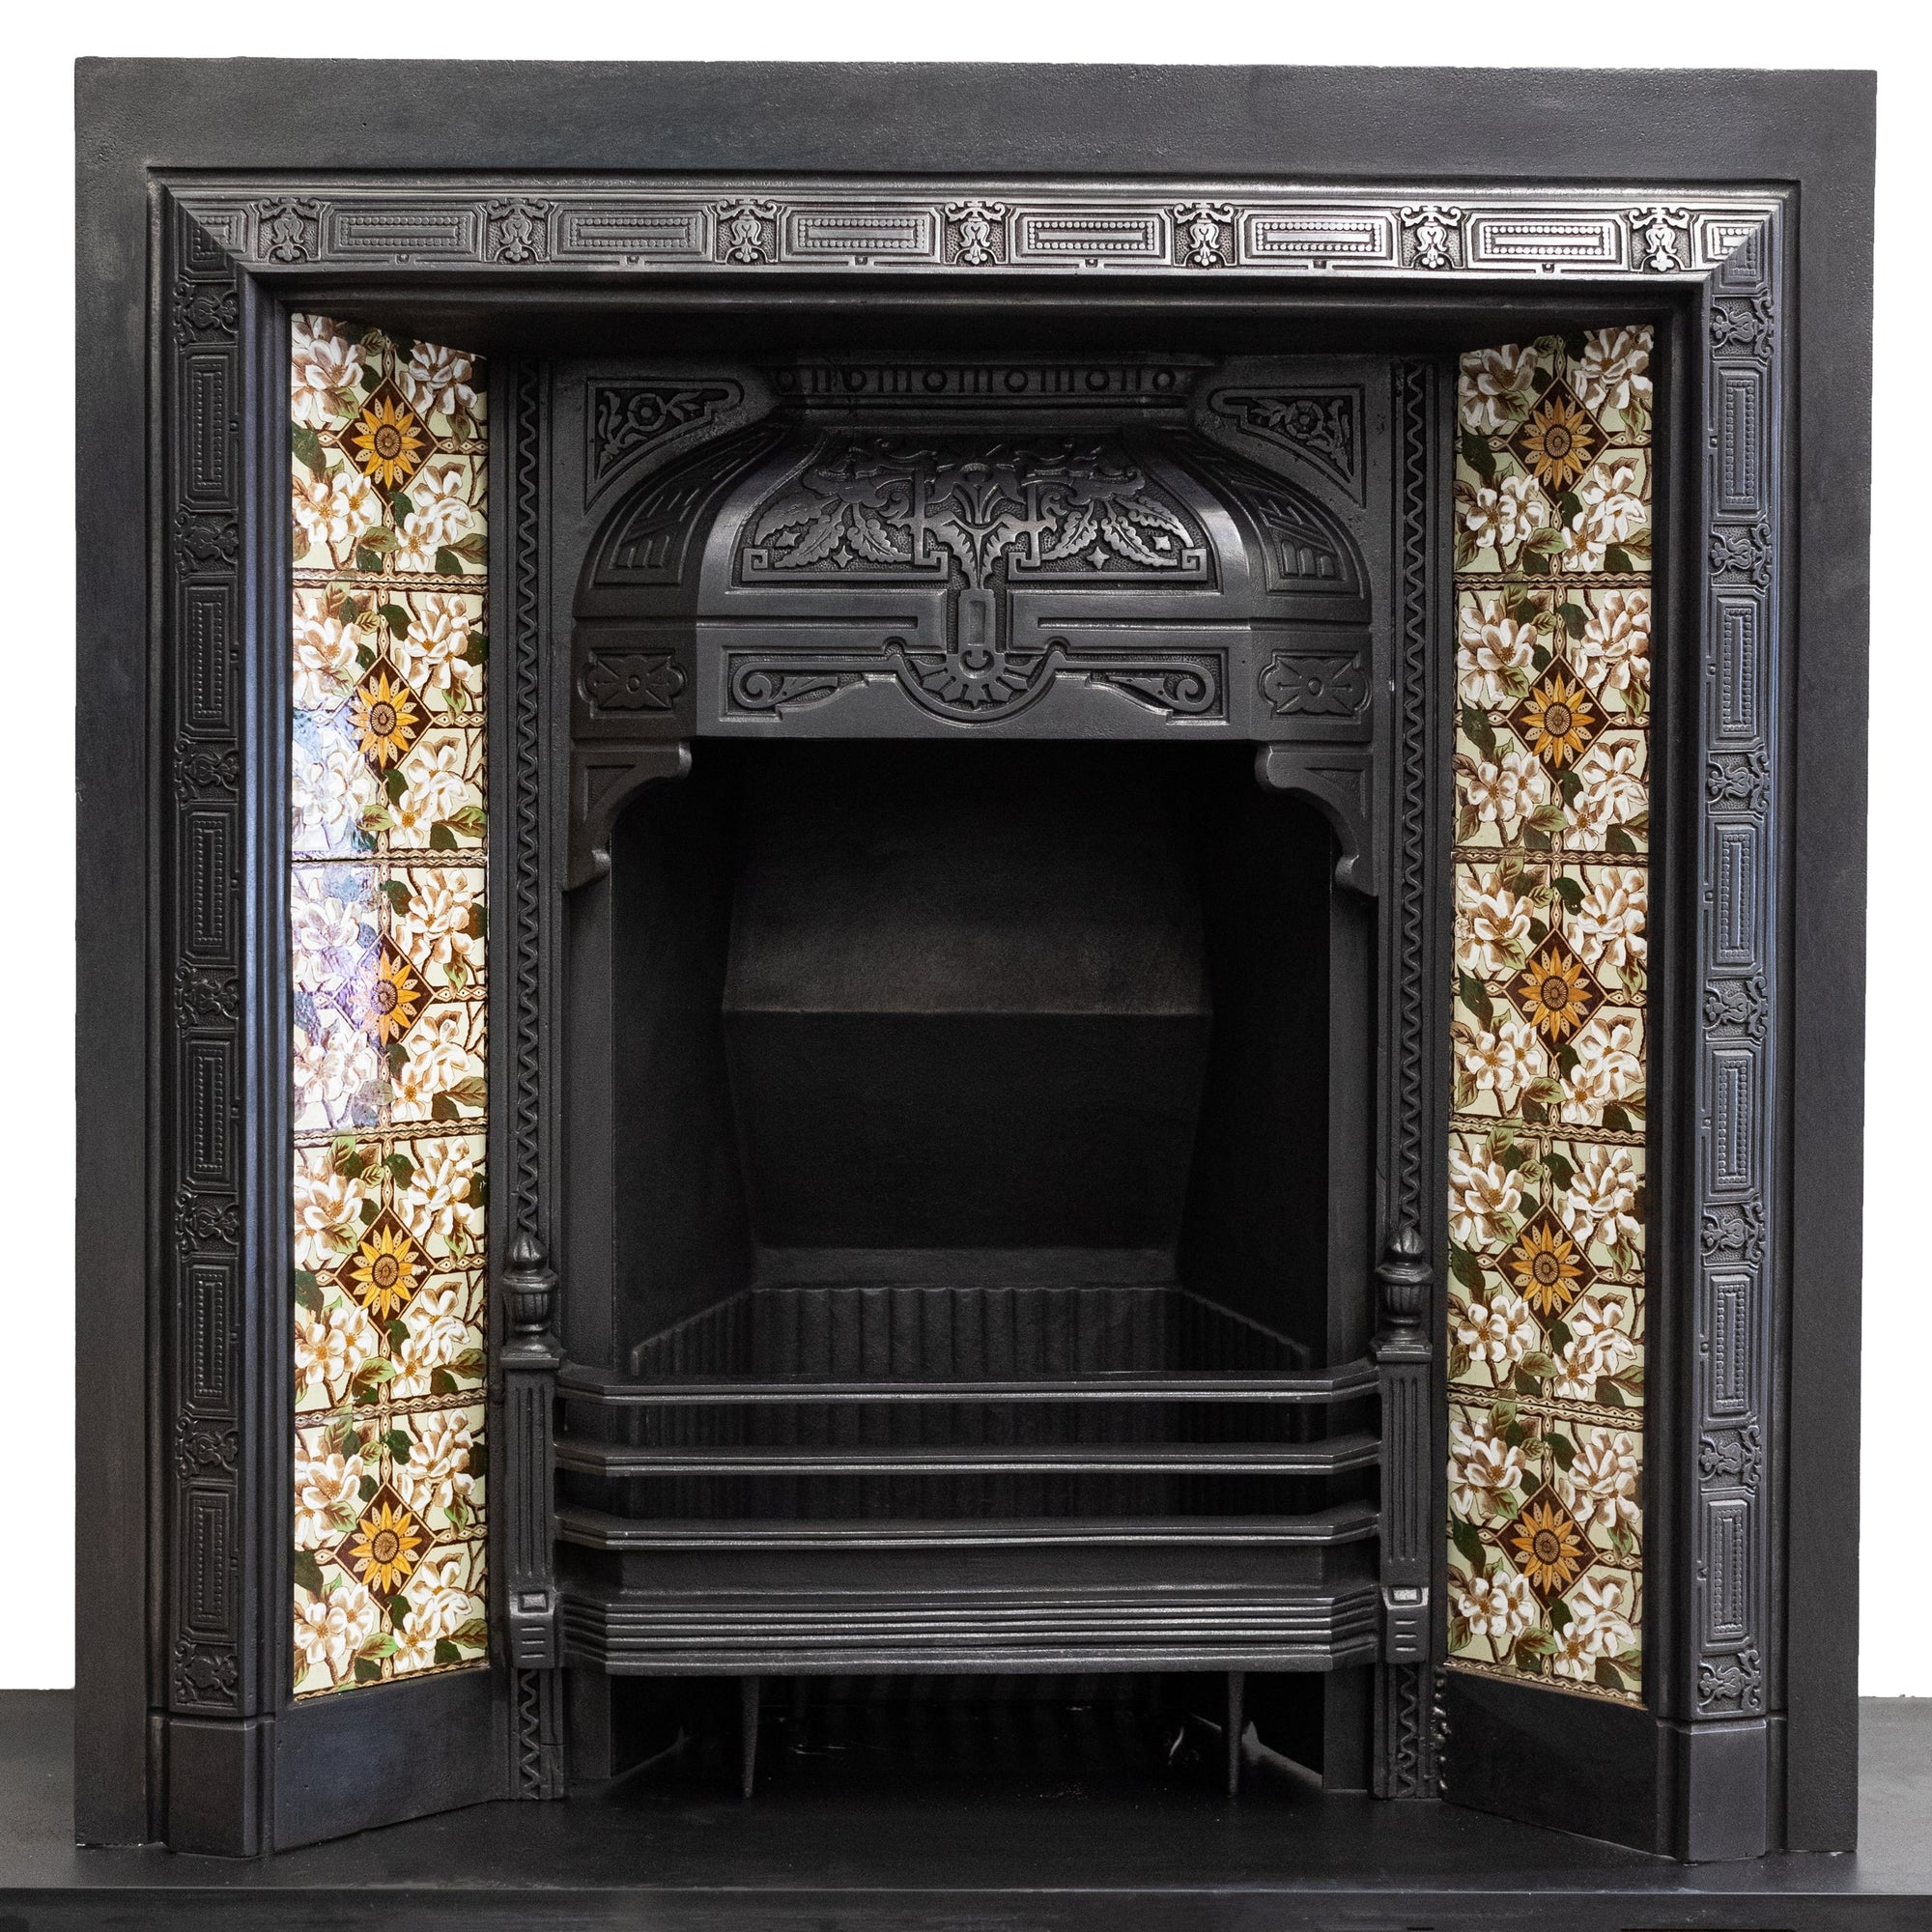 Antique Victorian Fireplace Insert with Sunflower Tiles | The Architectural Forum